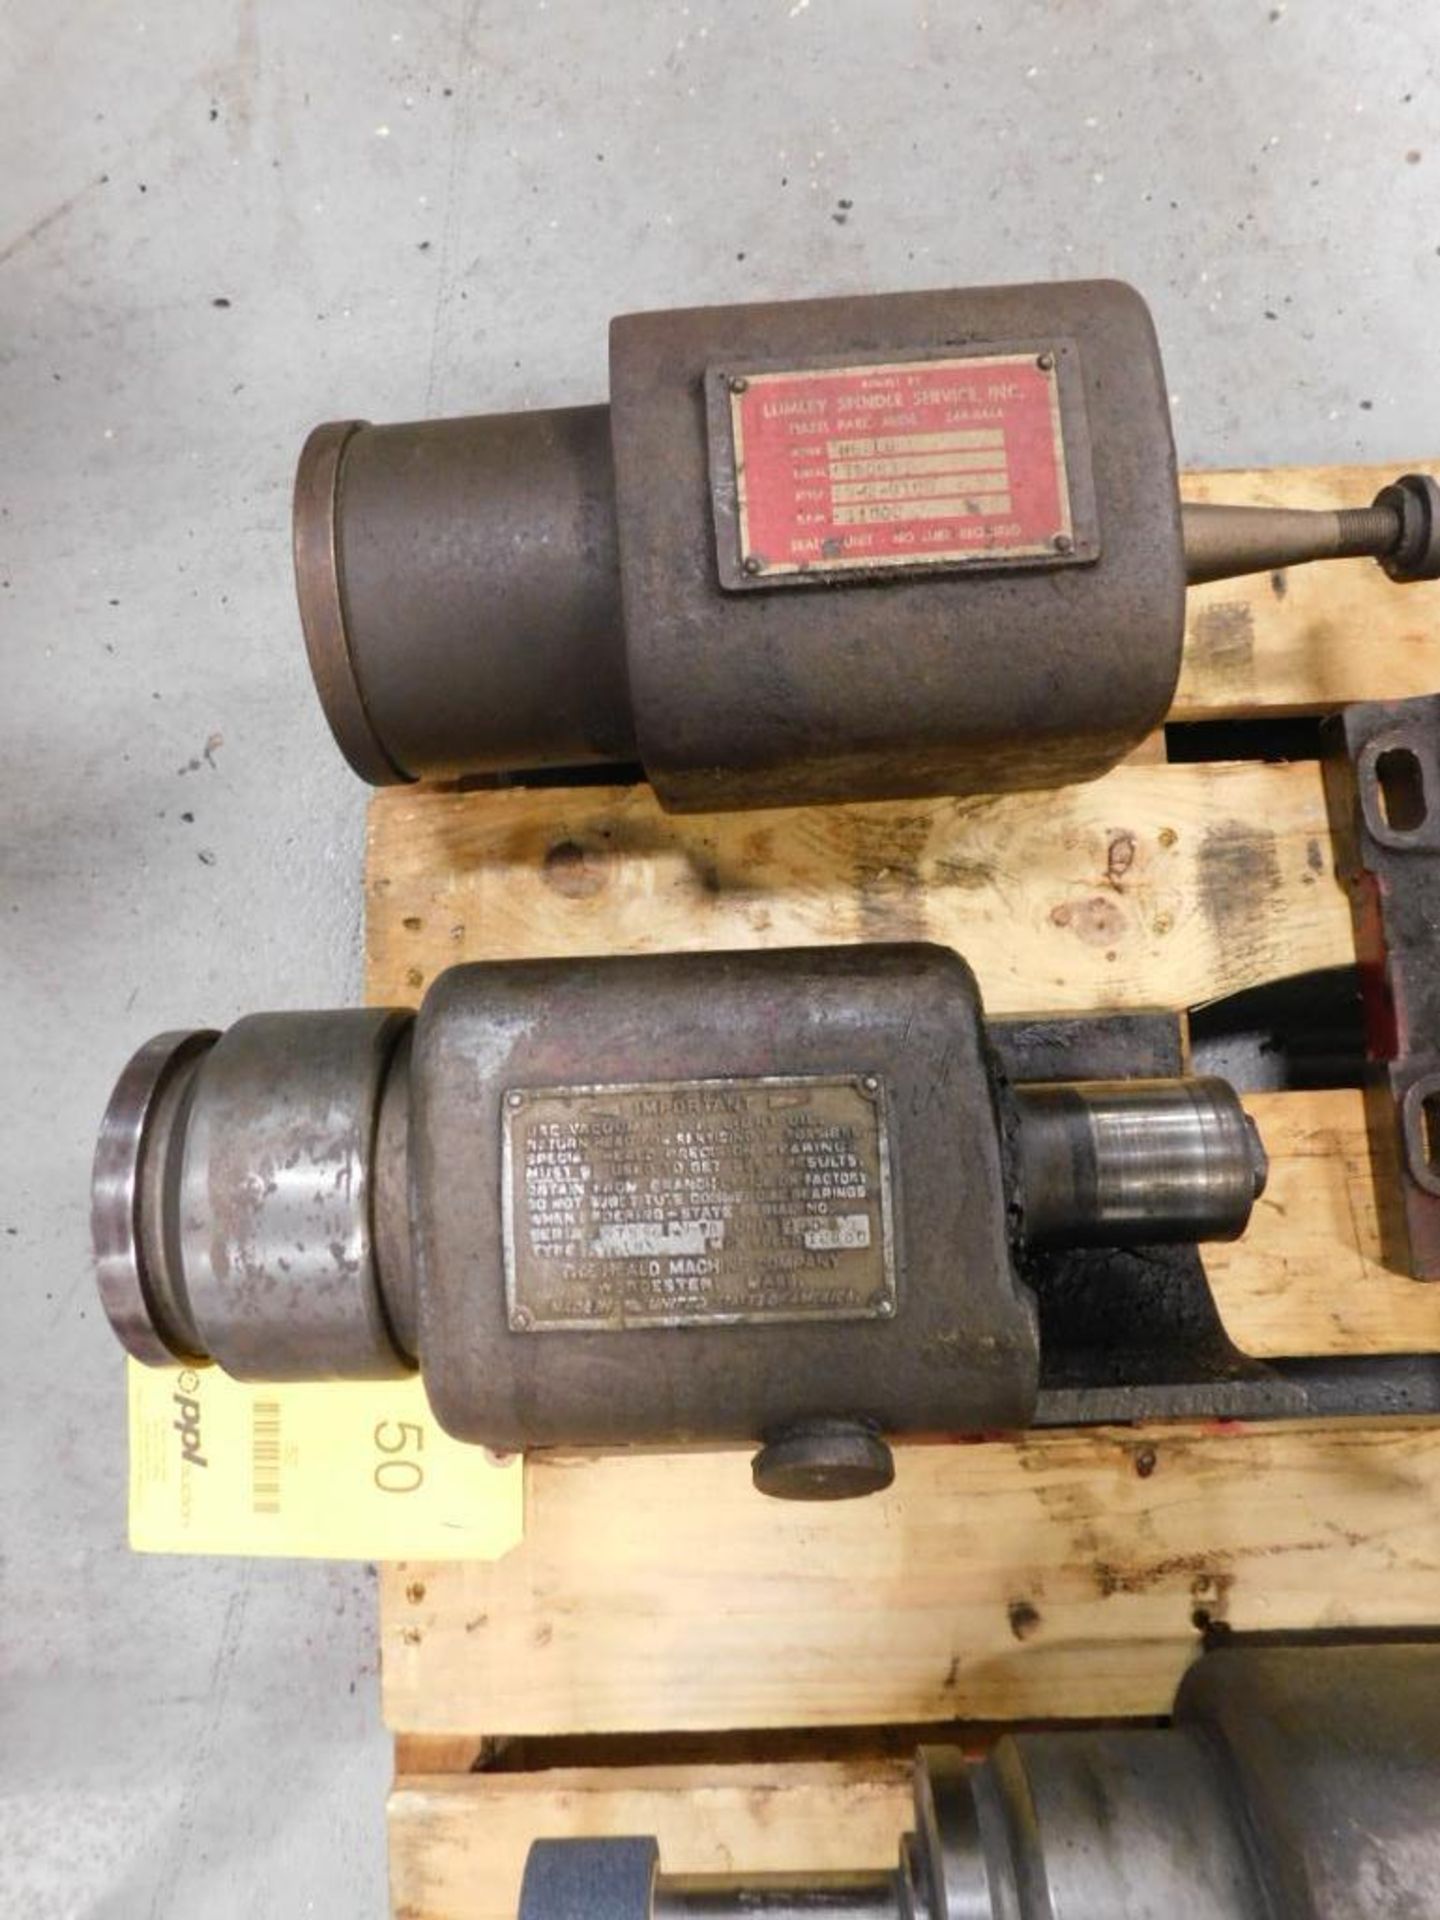 LOT: (2) Heald Spindles, (1) Ex-Cell-O Spindle